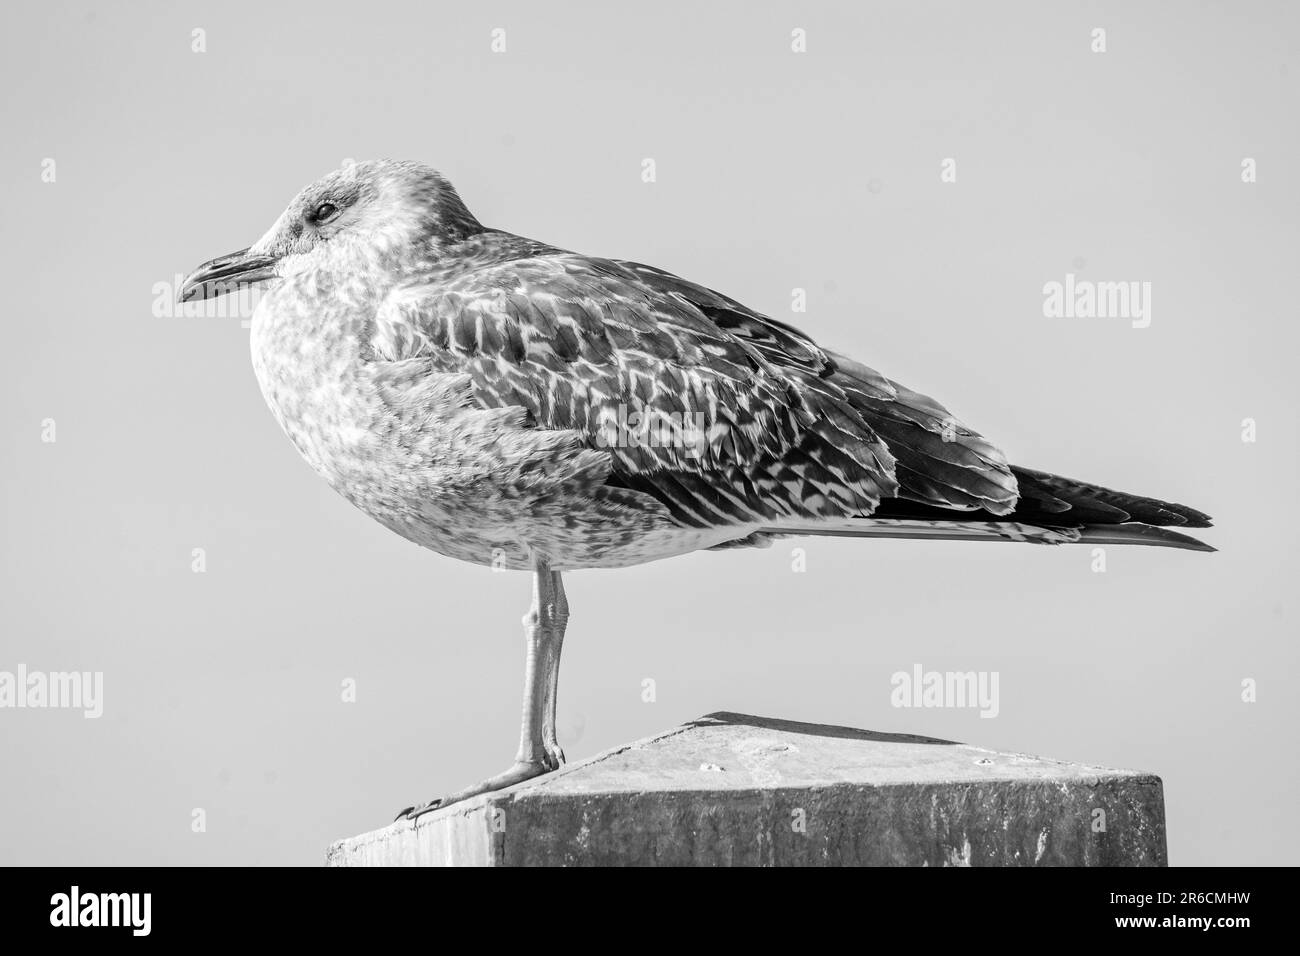 A High-resolution grayscale shot of a gray gull bird perched on a wooden post, with its wings slightly spread Stock Photo